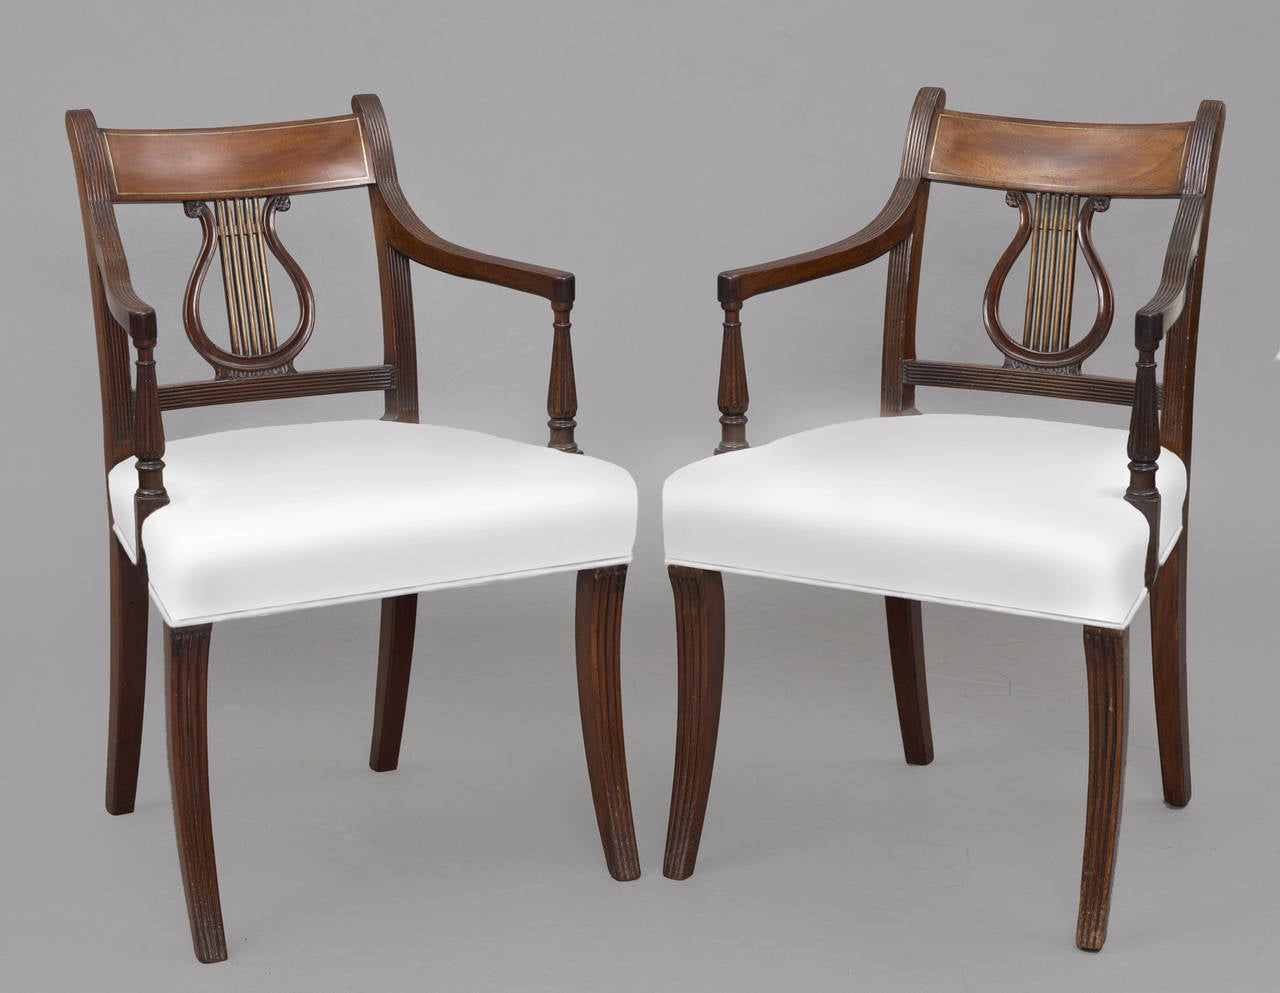 These mahogany armchairs have a top rail inlaid with brass, lyre-shaped splats inlaid with brass, a reeded frame, turned and reeded vase-shaped arm supports, sabre-shaped front and back legs and are upholstered in a white cotton fabric.

Item